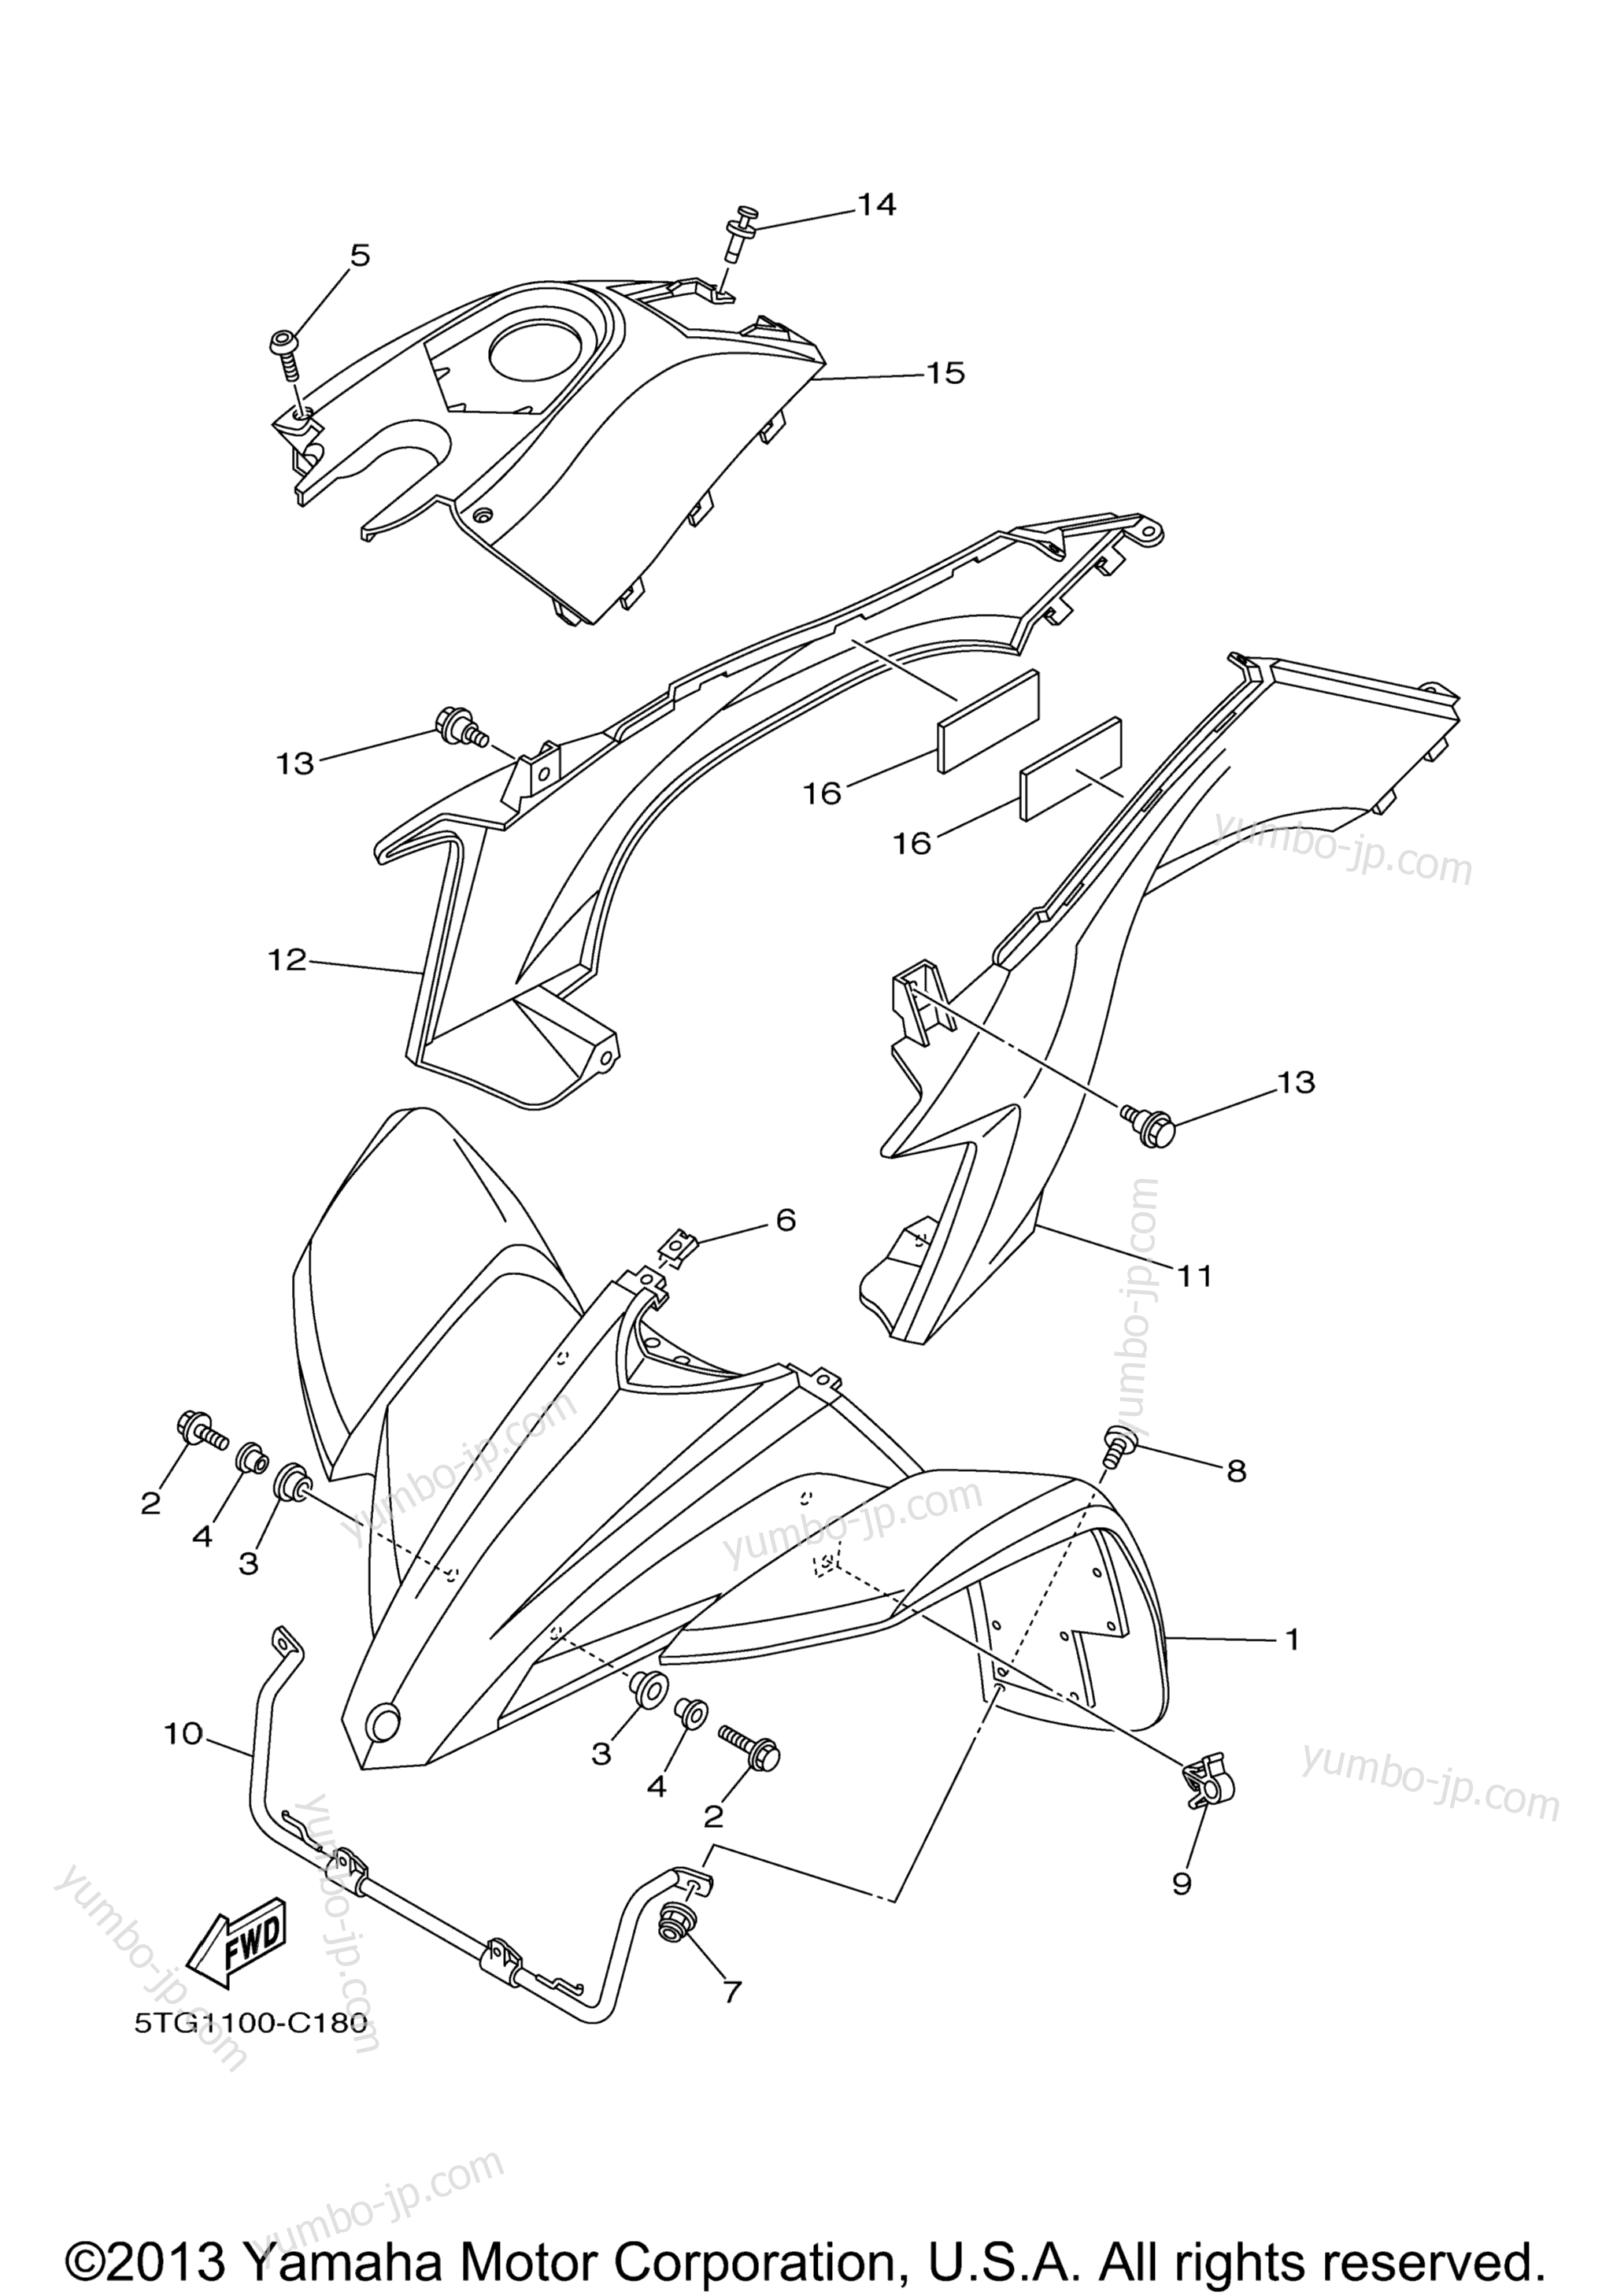 FRONT FENDER for ATVs YAMAHA YFZ450 SPECIAL EDITION (YFZ450SPX) 2008 year